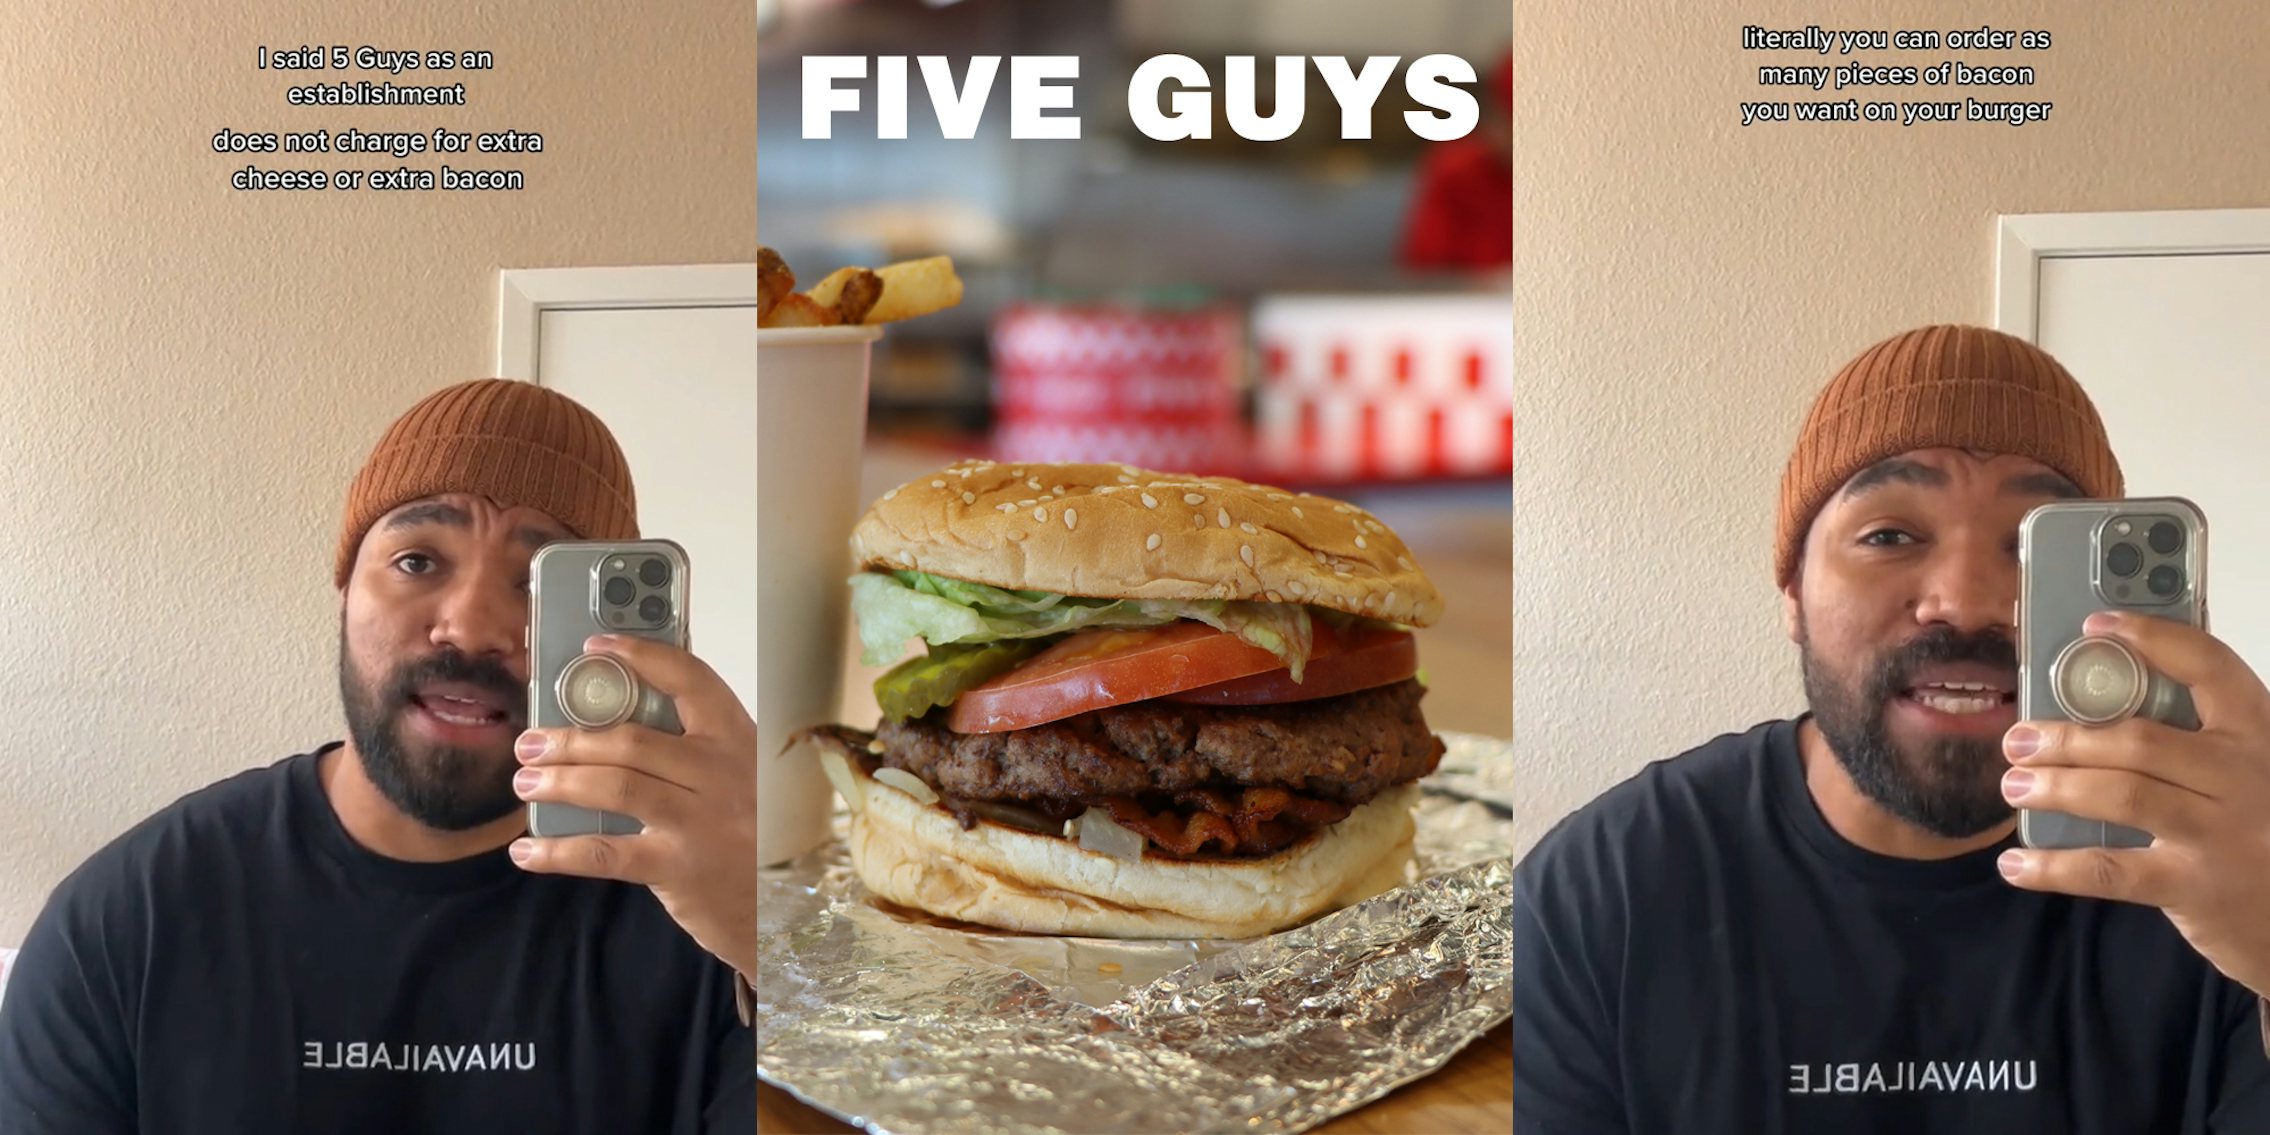 former Five Guys employee speaking with caption 'I said Five Guys as an establishment does not charge for extra cheese or bacon' (l) Five Guys logo with bacon burger on table (c) former Five Guys employee speaking with caption 'literally you can order as many pieces of bacon you want on your burger' (r)